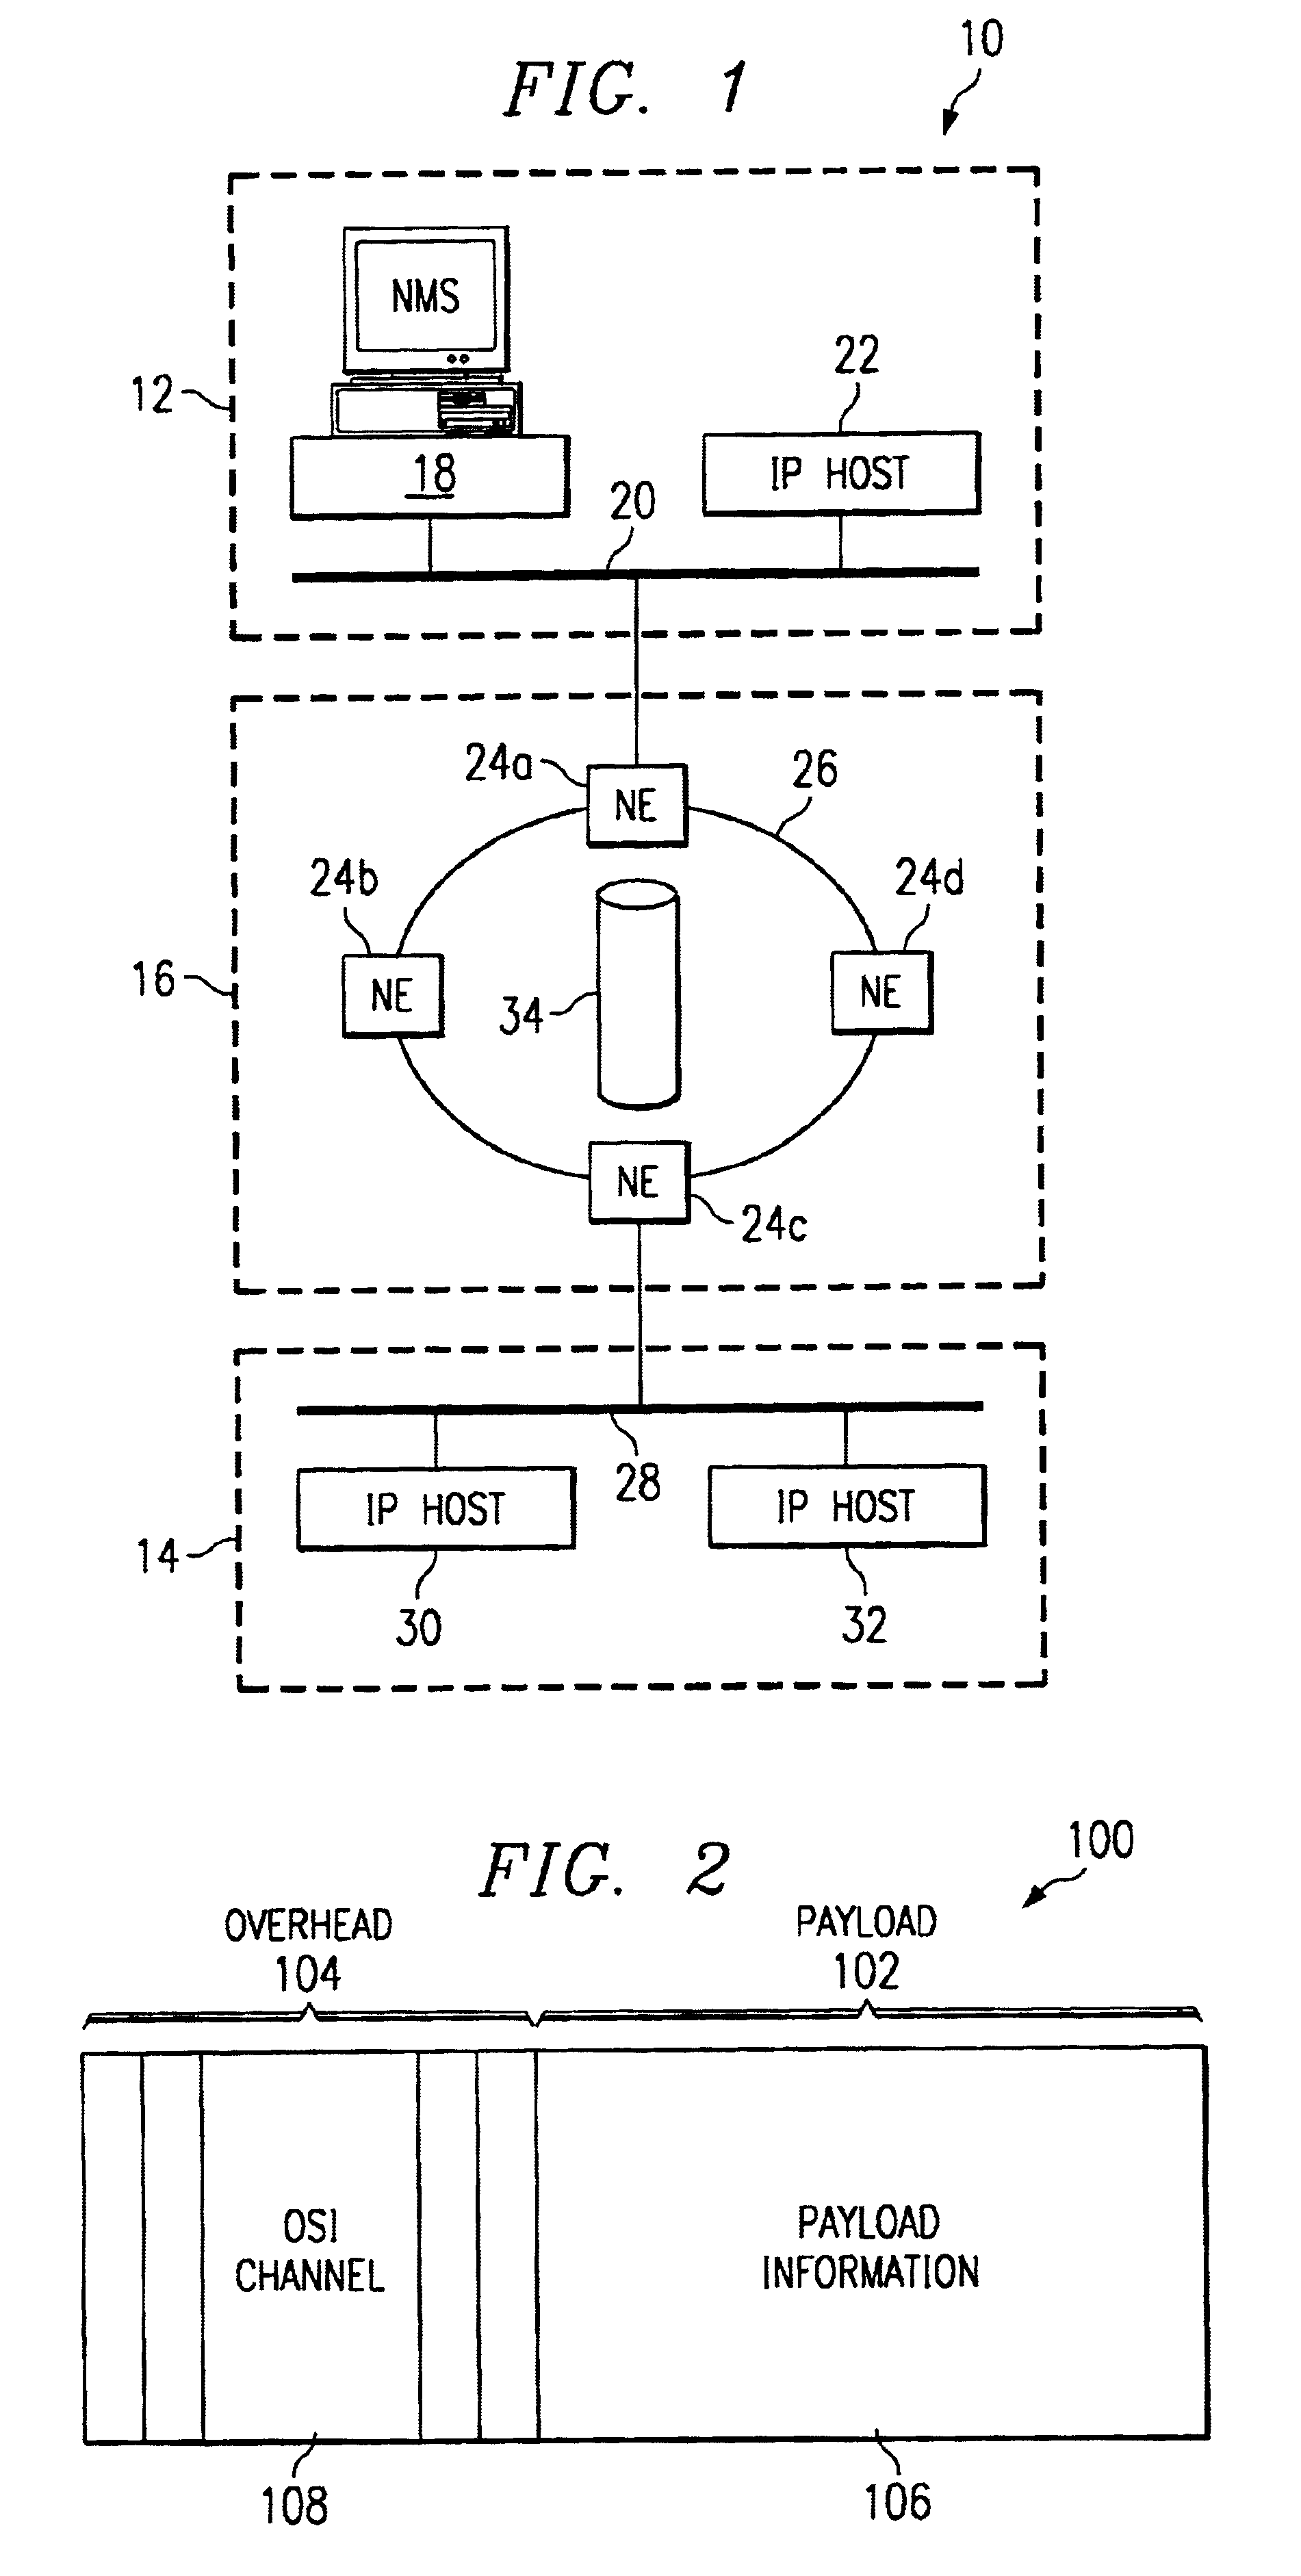 Method and system for transporting packet-switched control traffic in an optical network